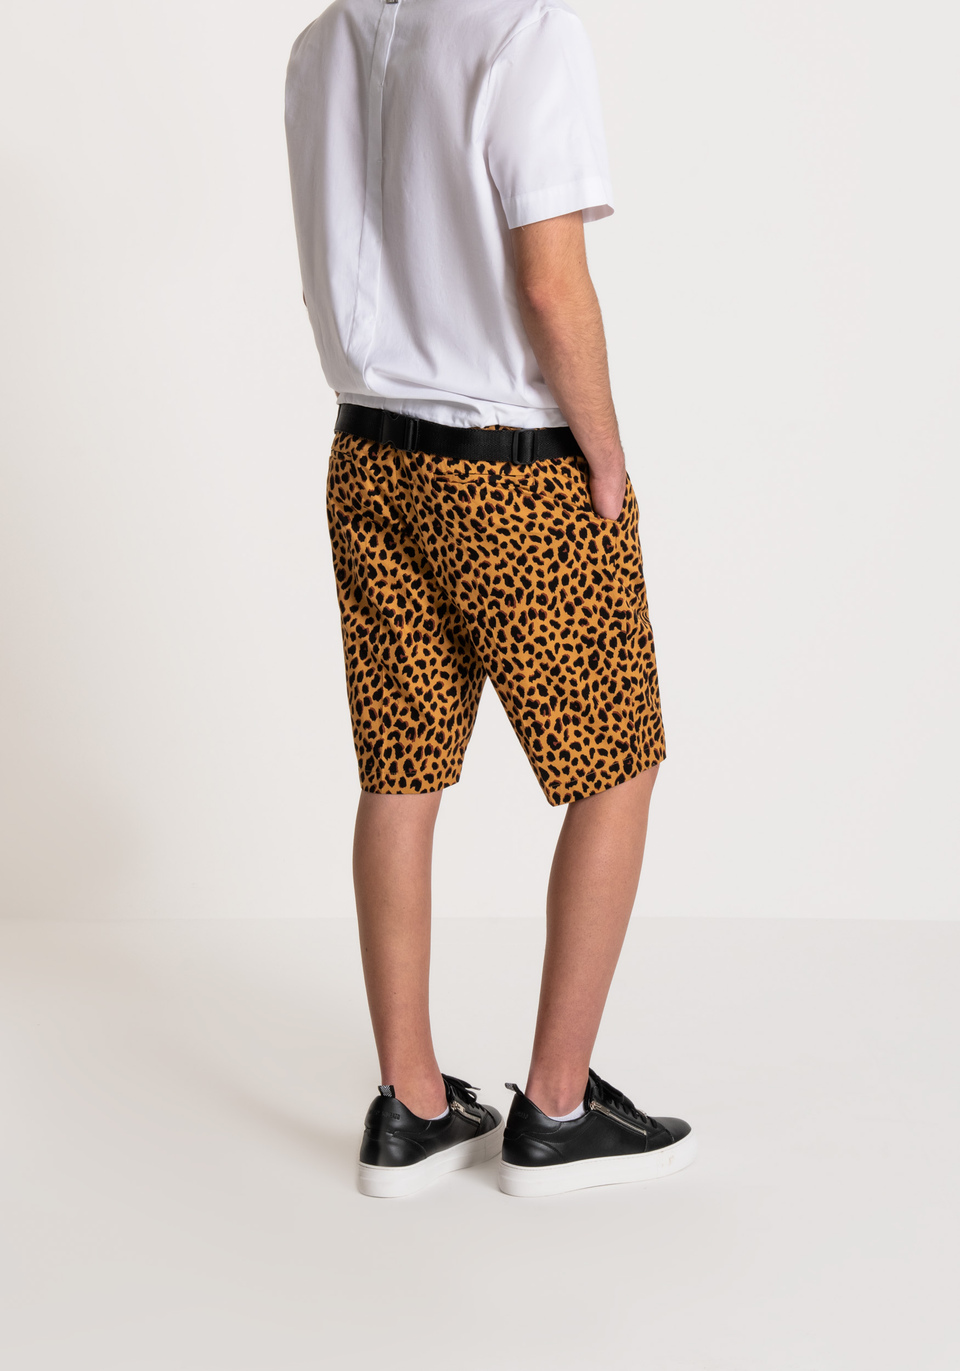 CARROT-CUT “RALPH” SHORTS IN ANIMAL-PATTERNED COTTON - Antony Morato Online Shop